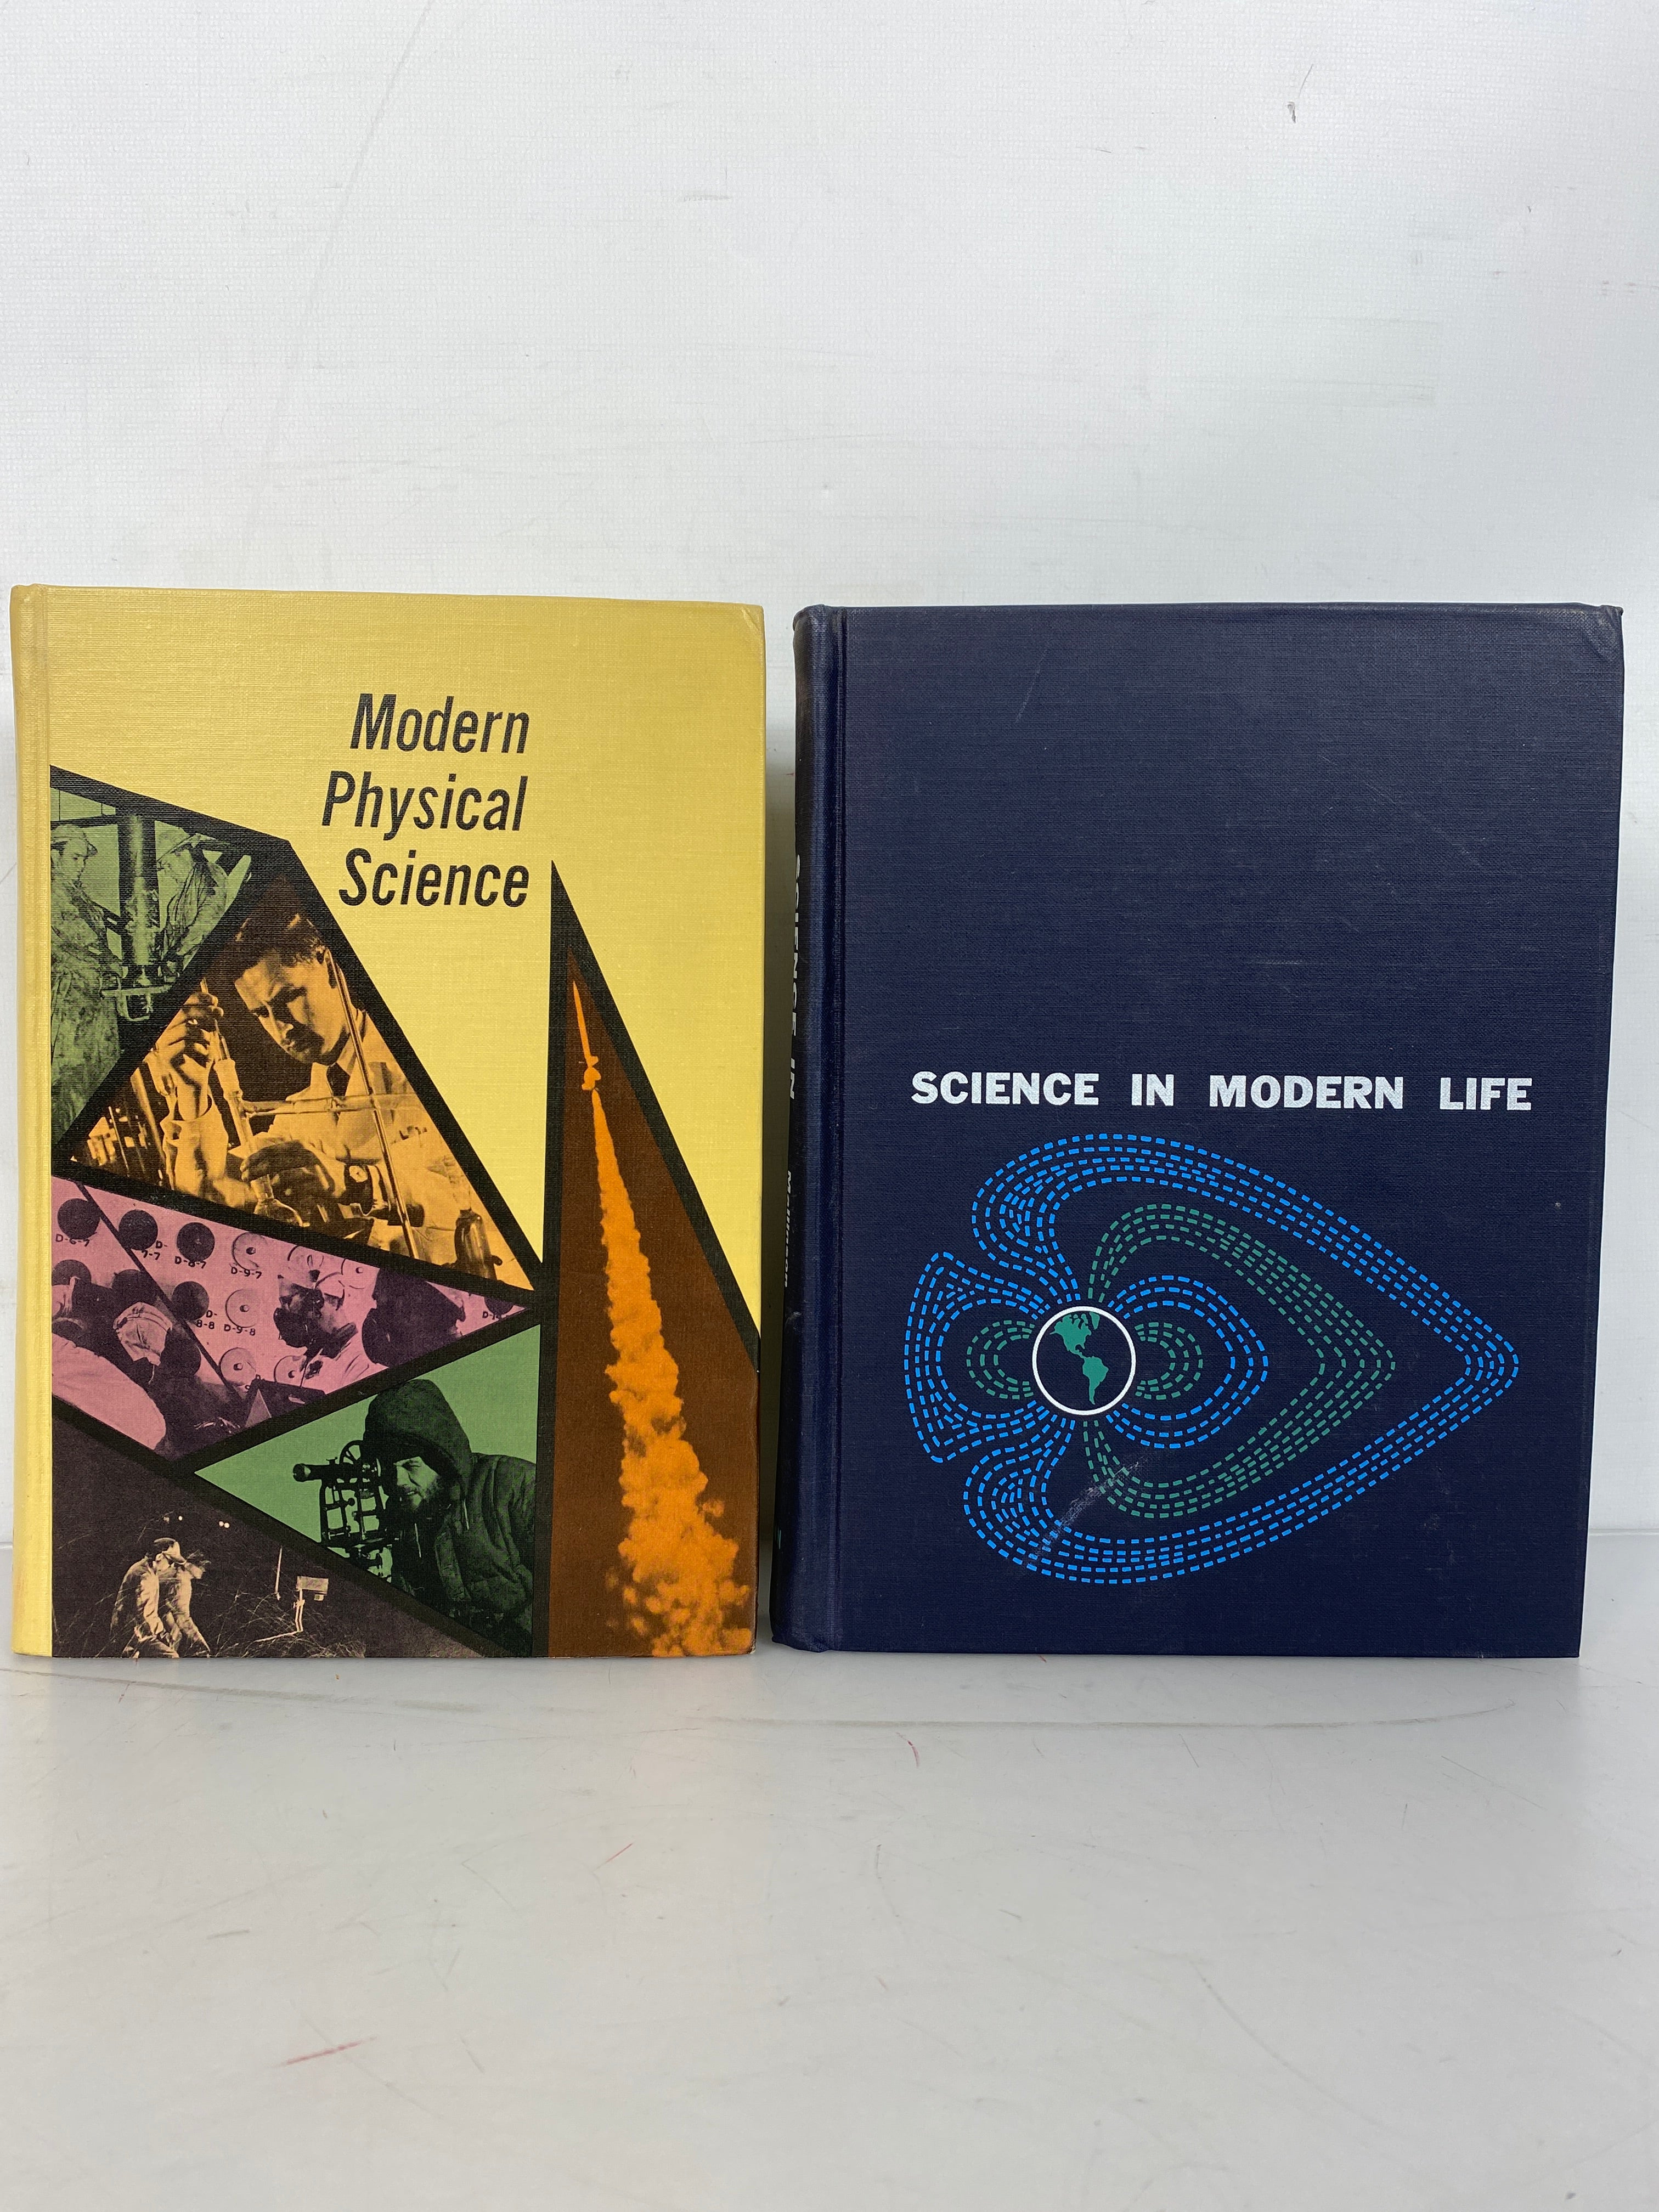 Lot of 2 Science Textbooks Modern Physical Science and Science in Modern Life 1962-1964 HC